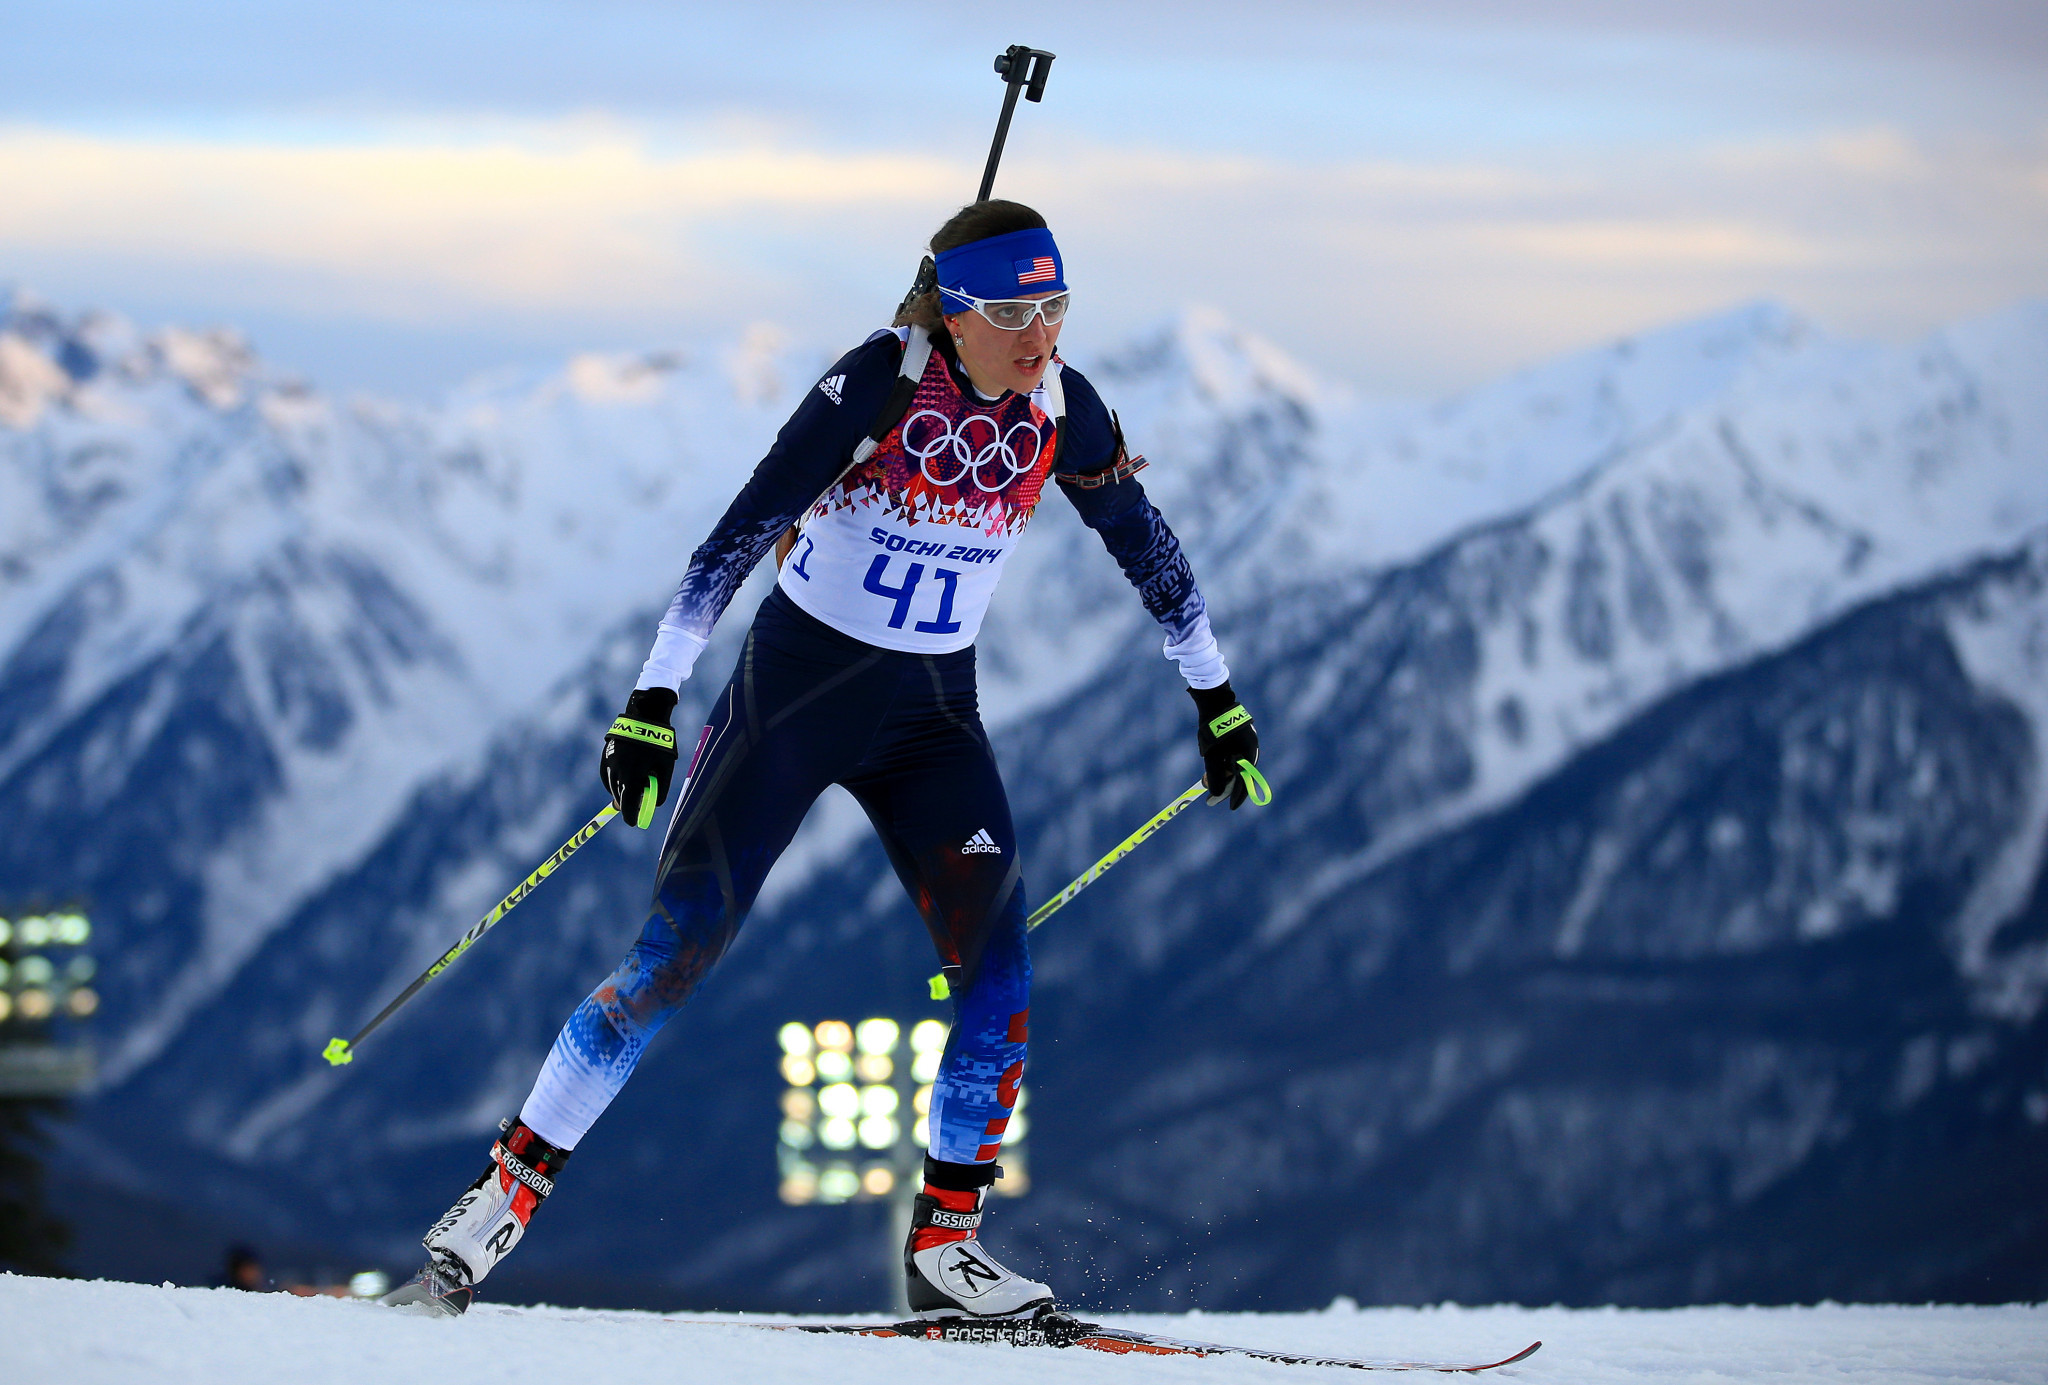 Sara Studebaker-Hall competed at two Winter Olympic Games, including Sochi 2014 ©Getty Images